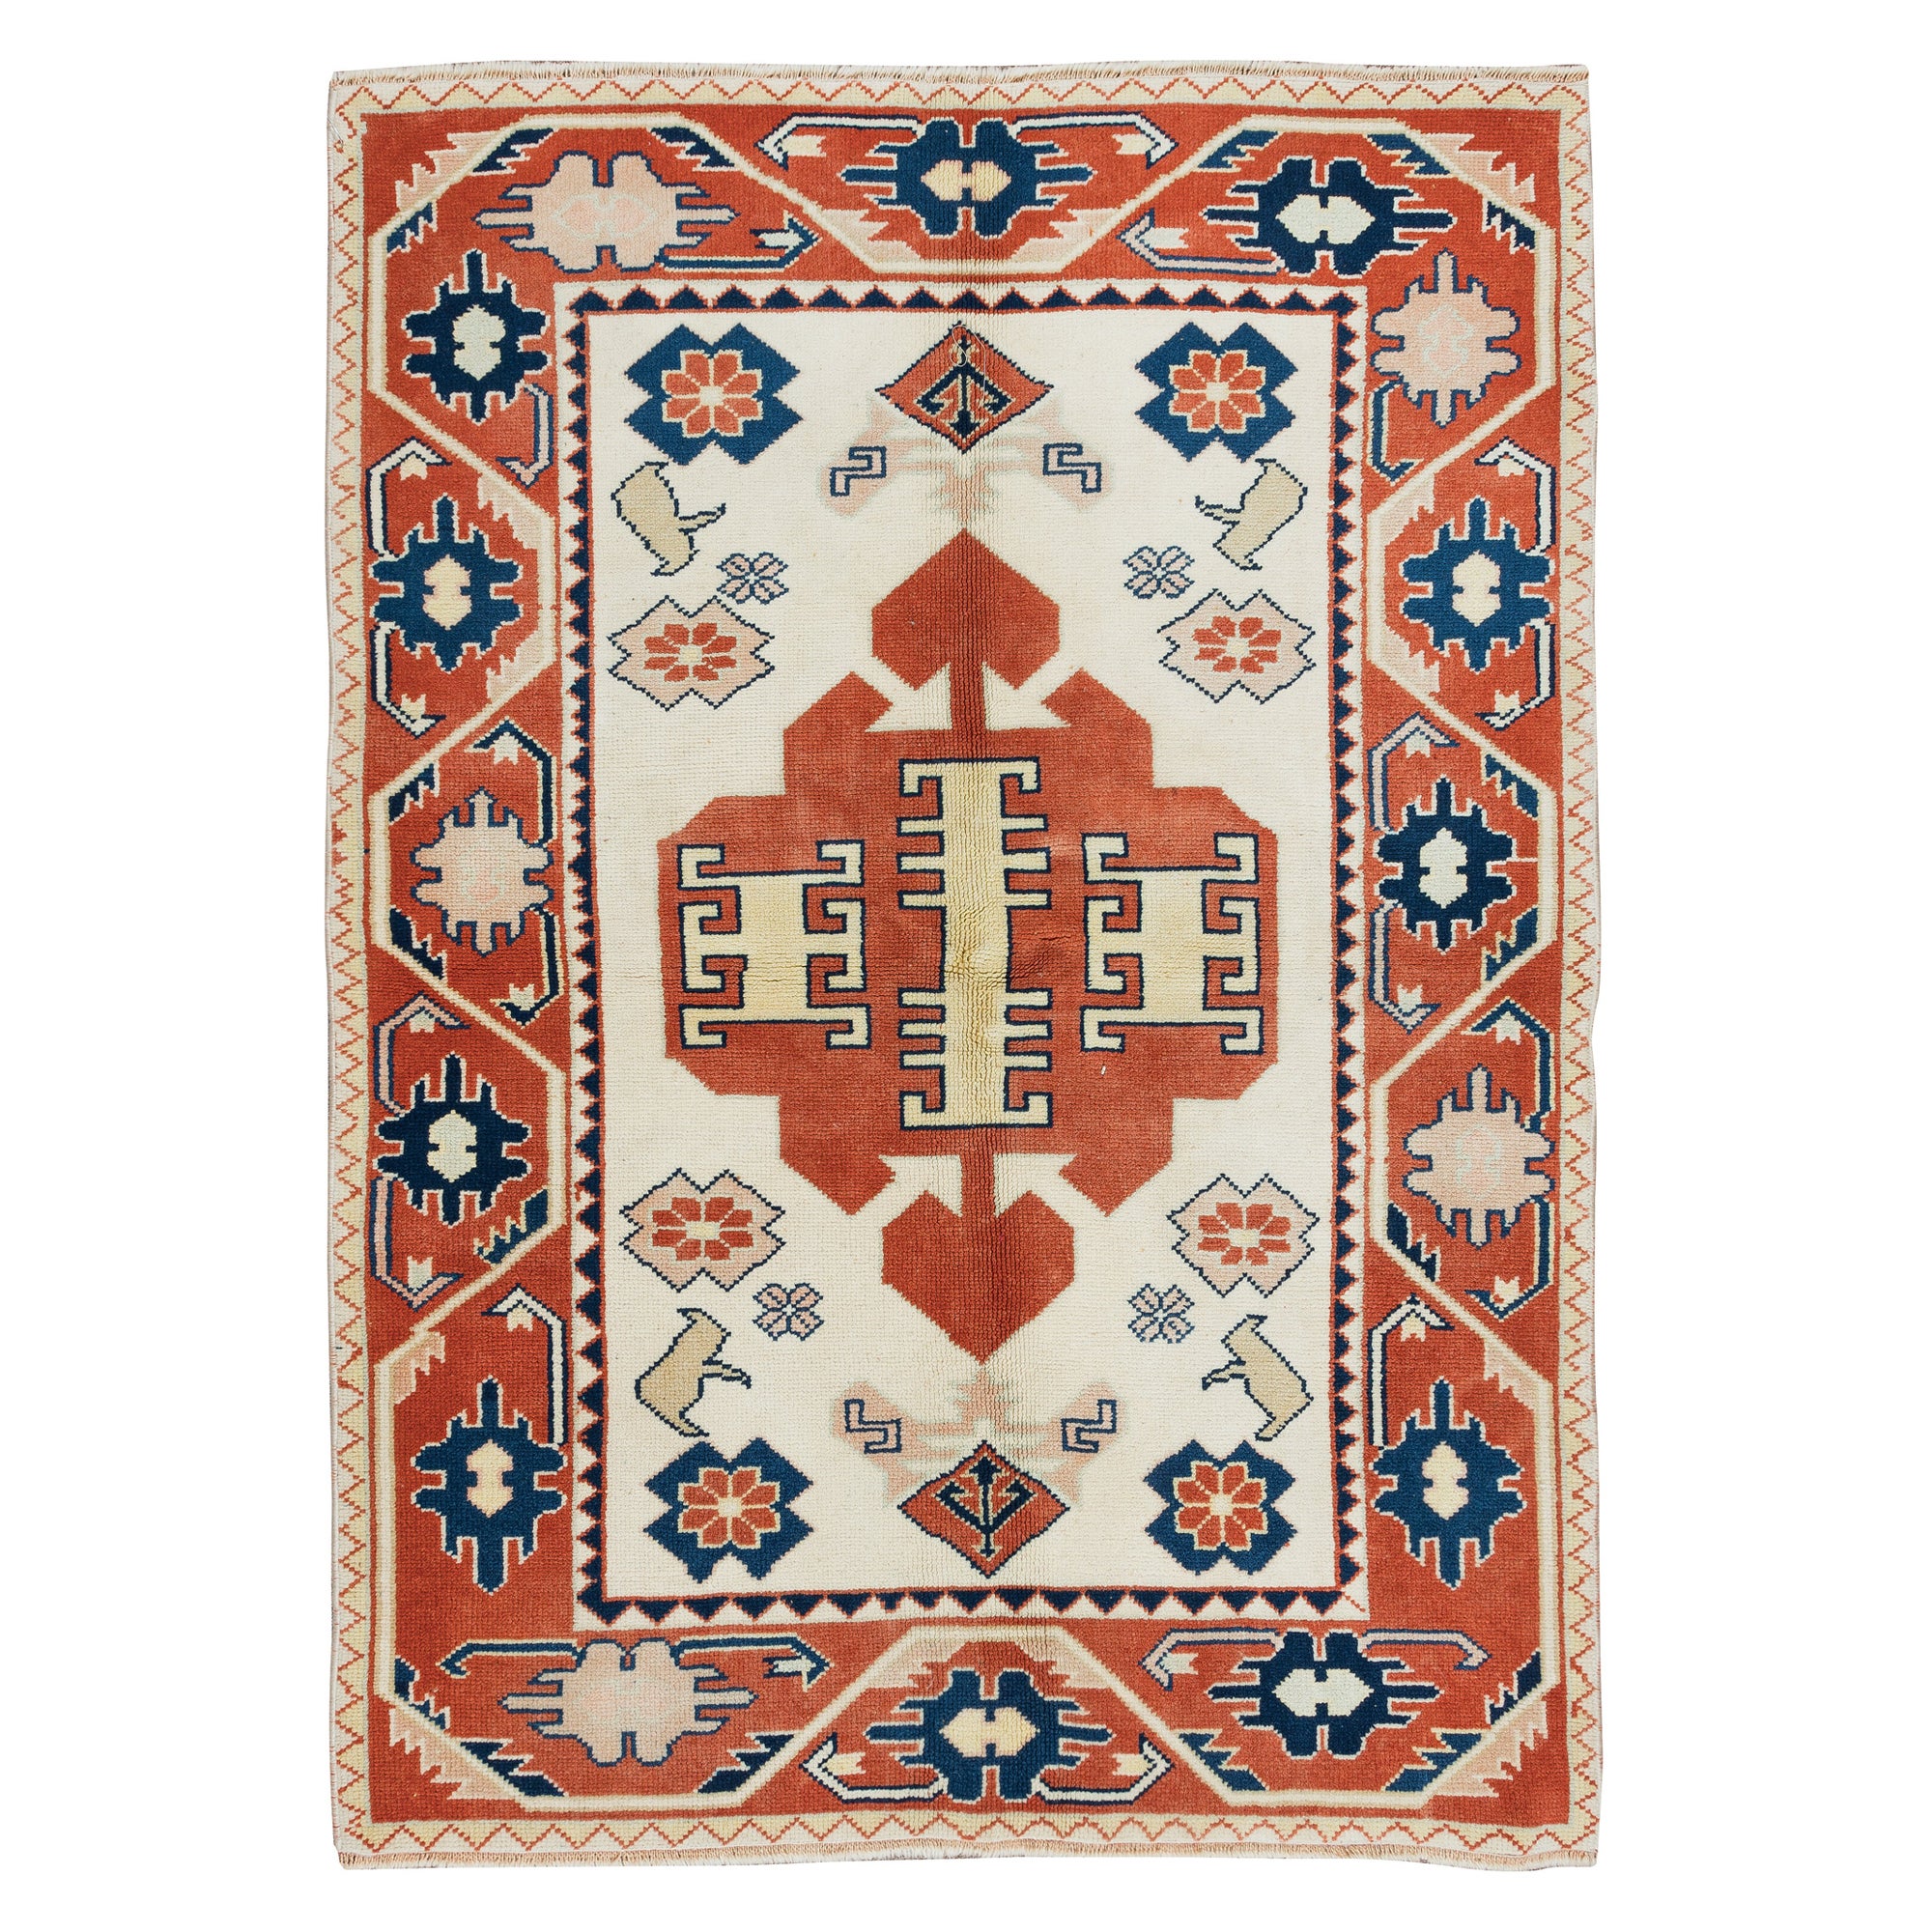 4x5.6 Ft Vintage Handmade Geometric Turkish Rug in Cream, Red and Blue Colors